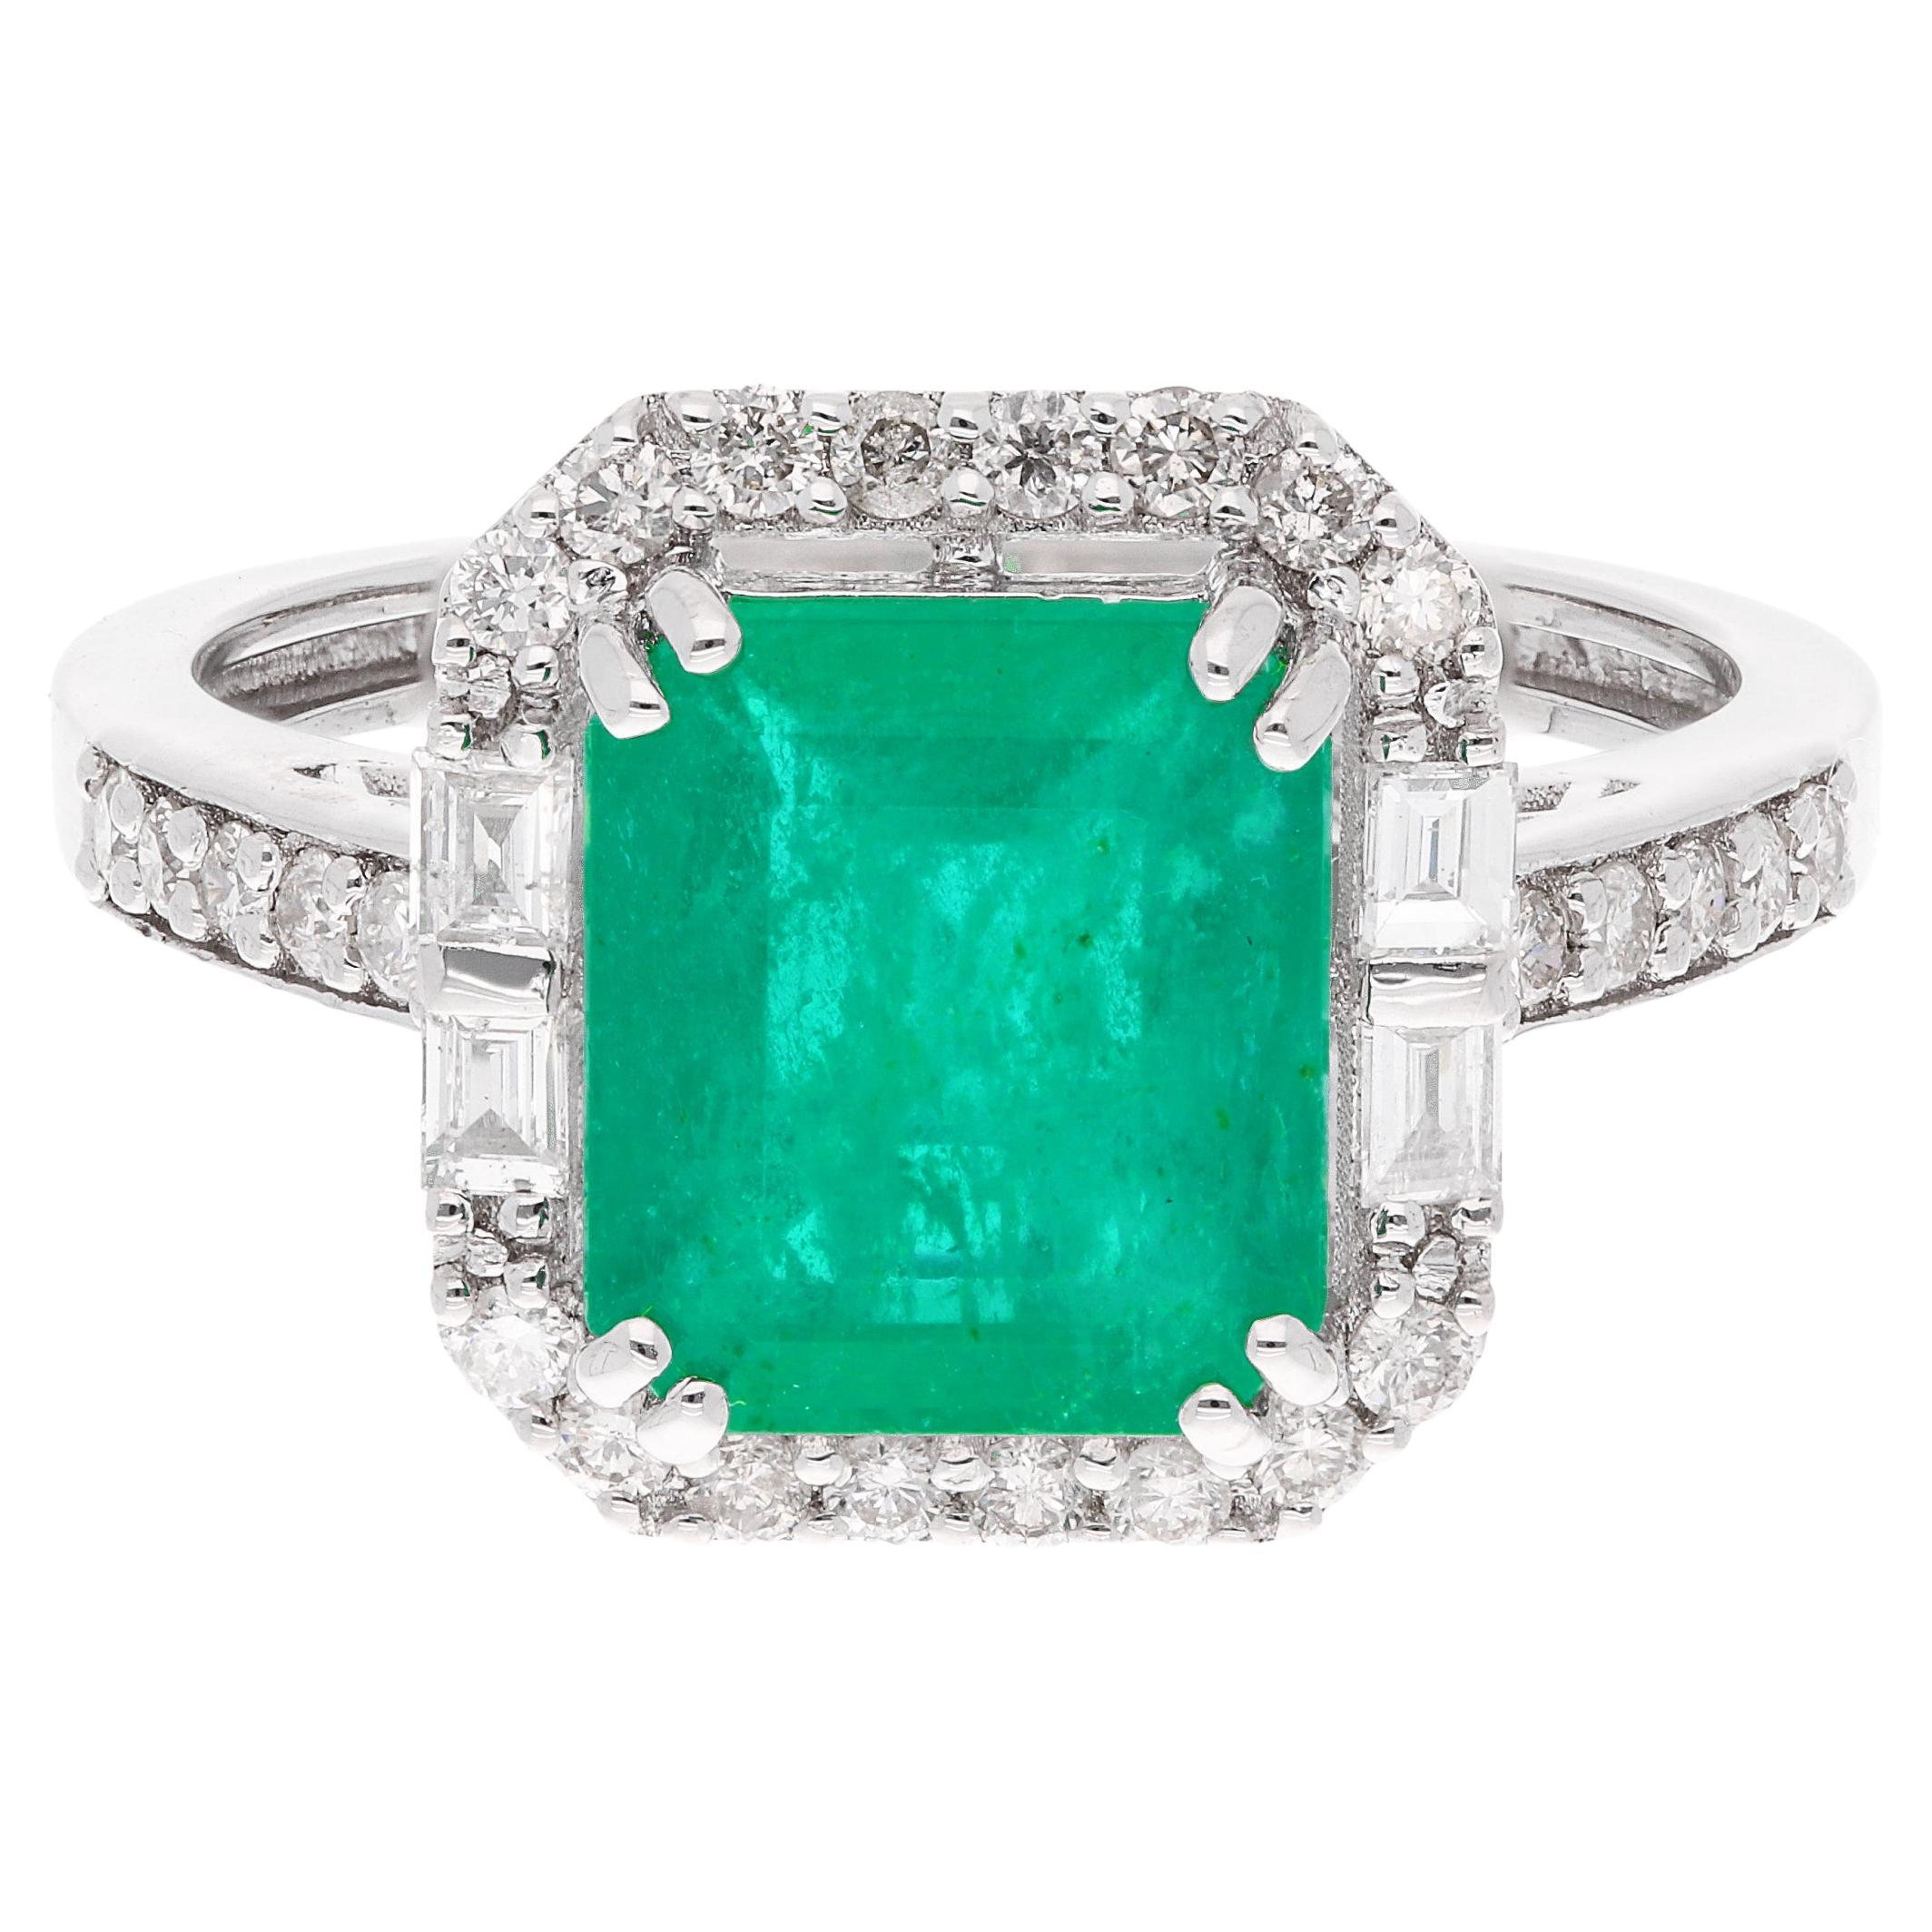 Natural Emerald Gemstone Cocktail Ring Baguette Diamond 14k White Gold Jewelry For Sale